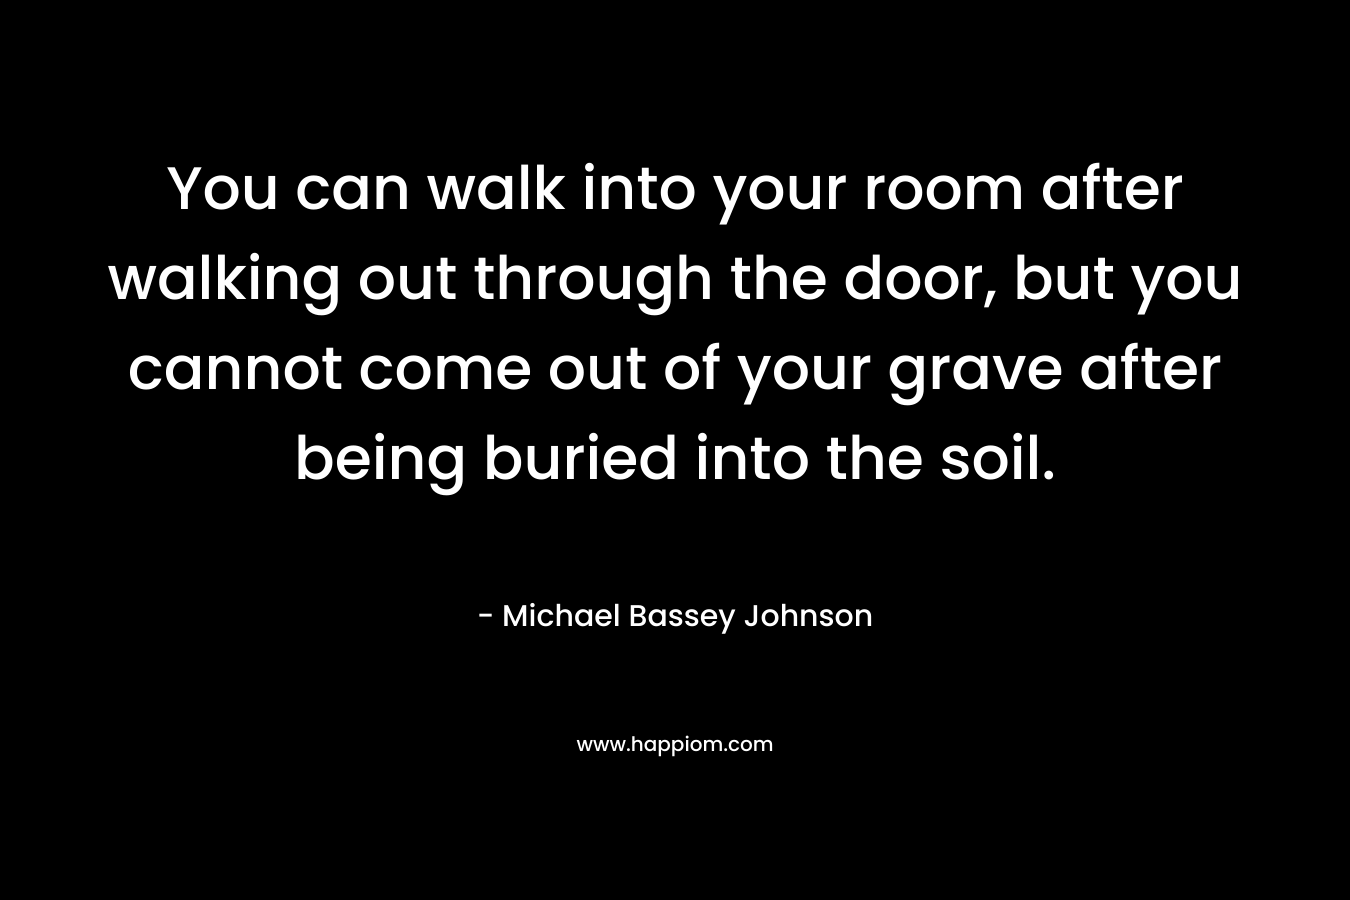 You can walk into your room after walking out through the door, but you cannot come out of your grave after being buried into the soil. – Michael Bassey Johnson